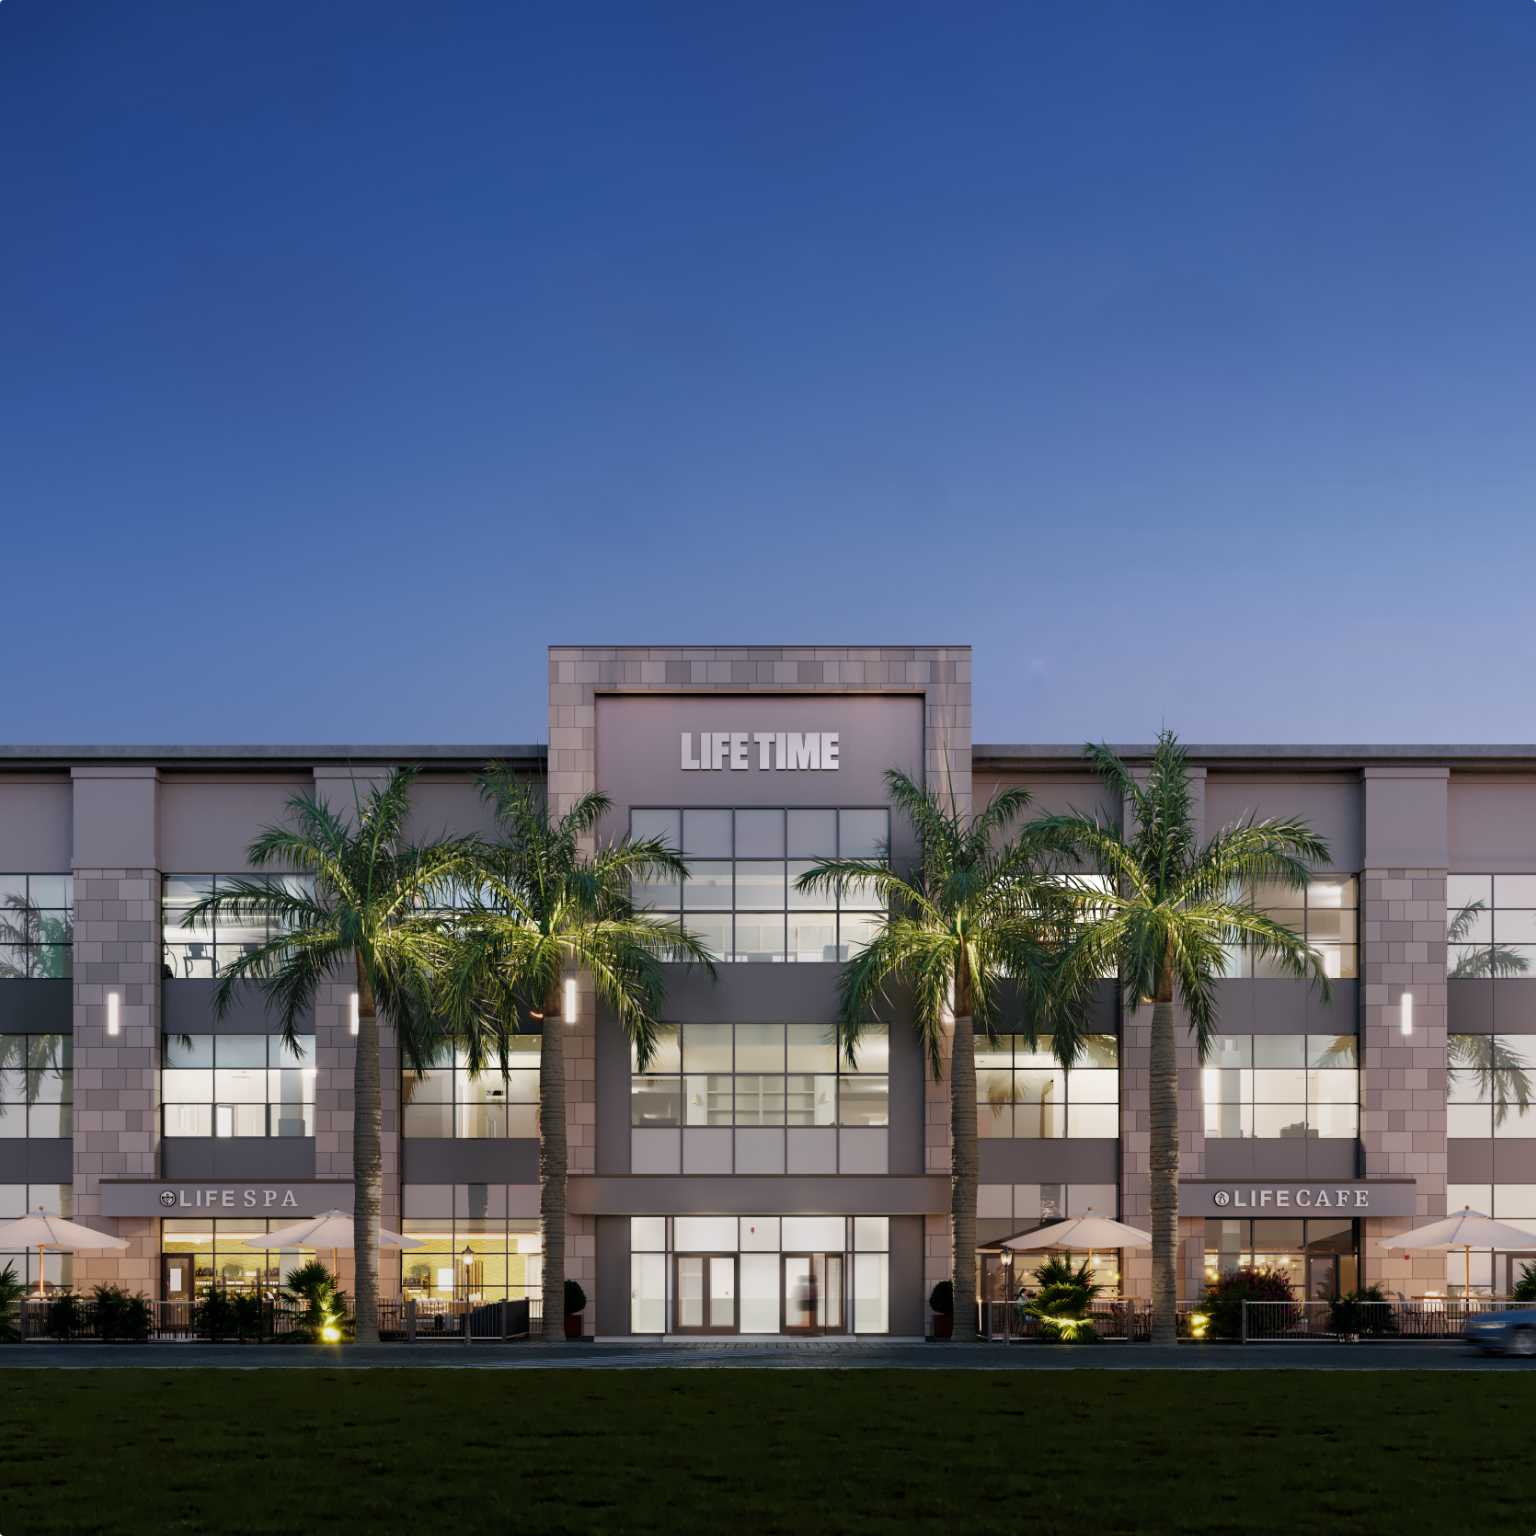 Building exterior at Life Time Miami